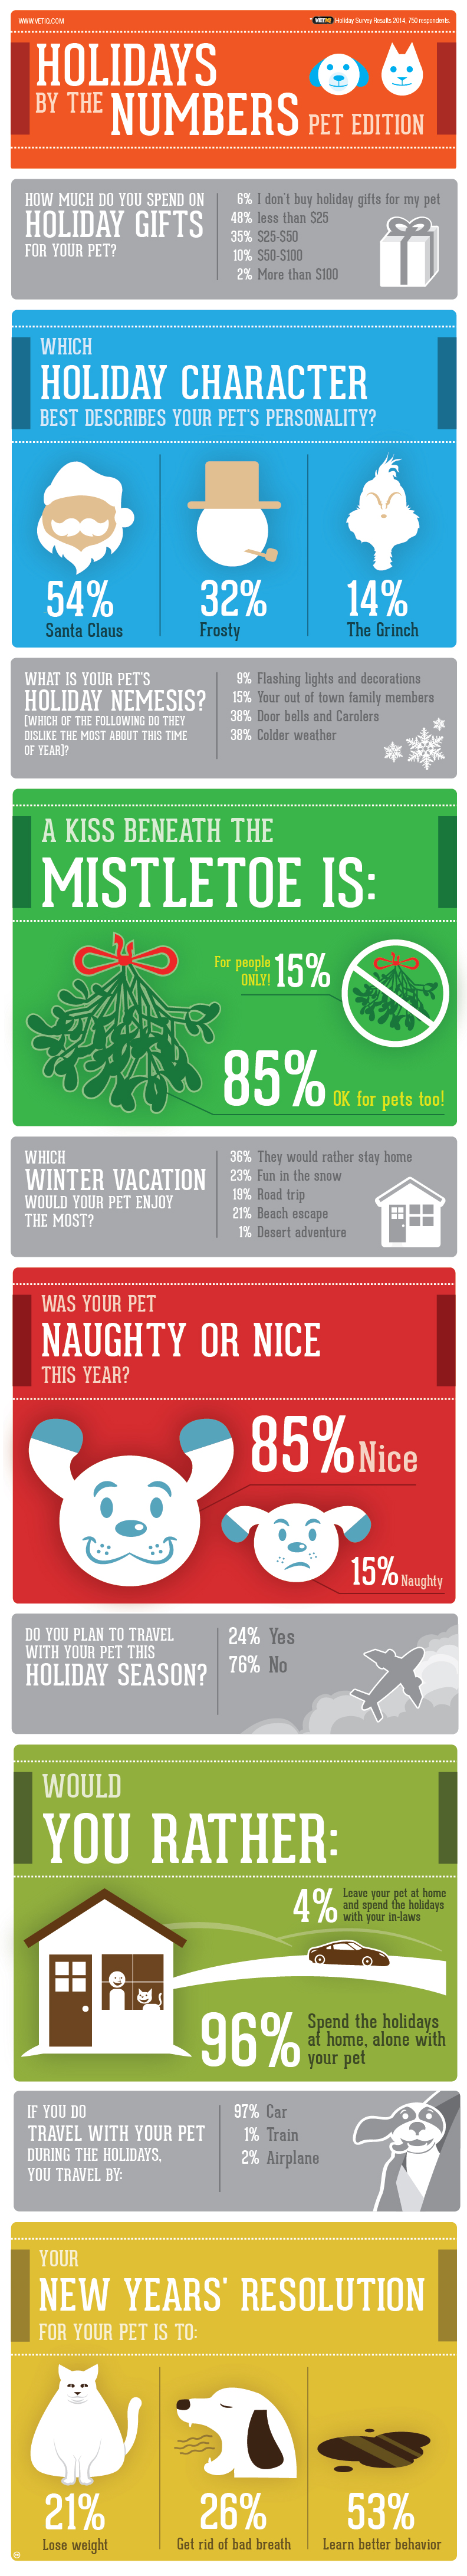 Holidays With Your Pets by the Numbers: An Infographic From VetIQ Pet Care